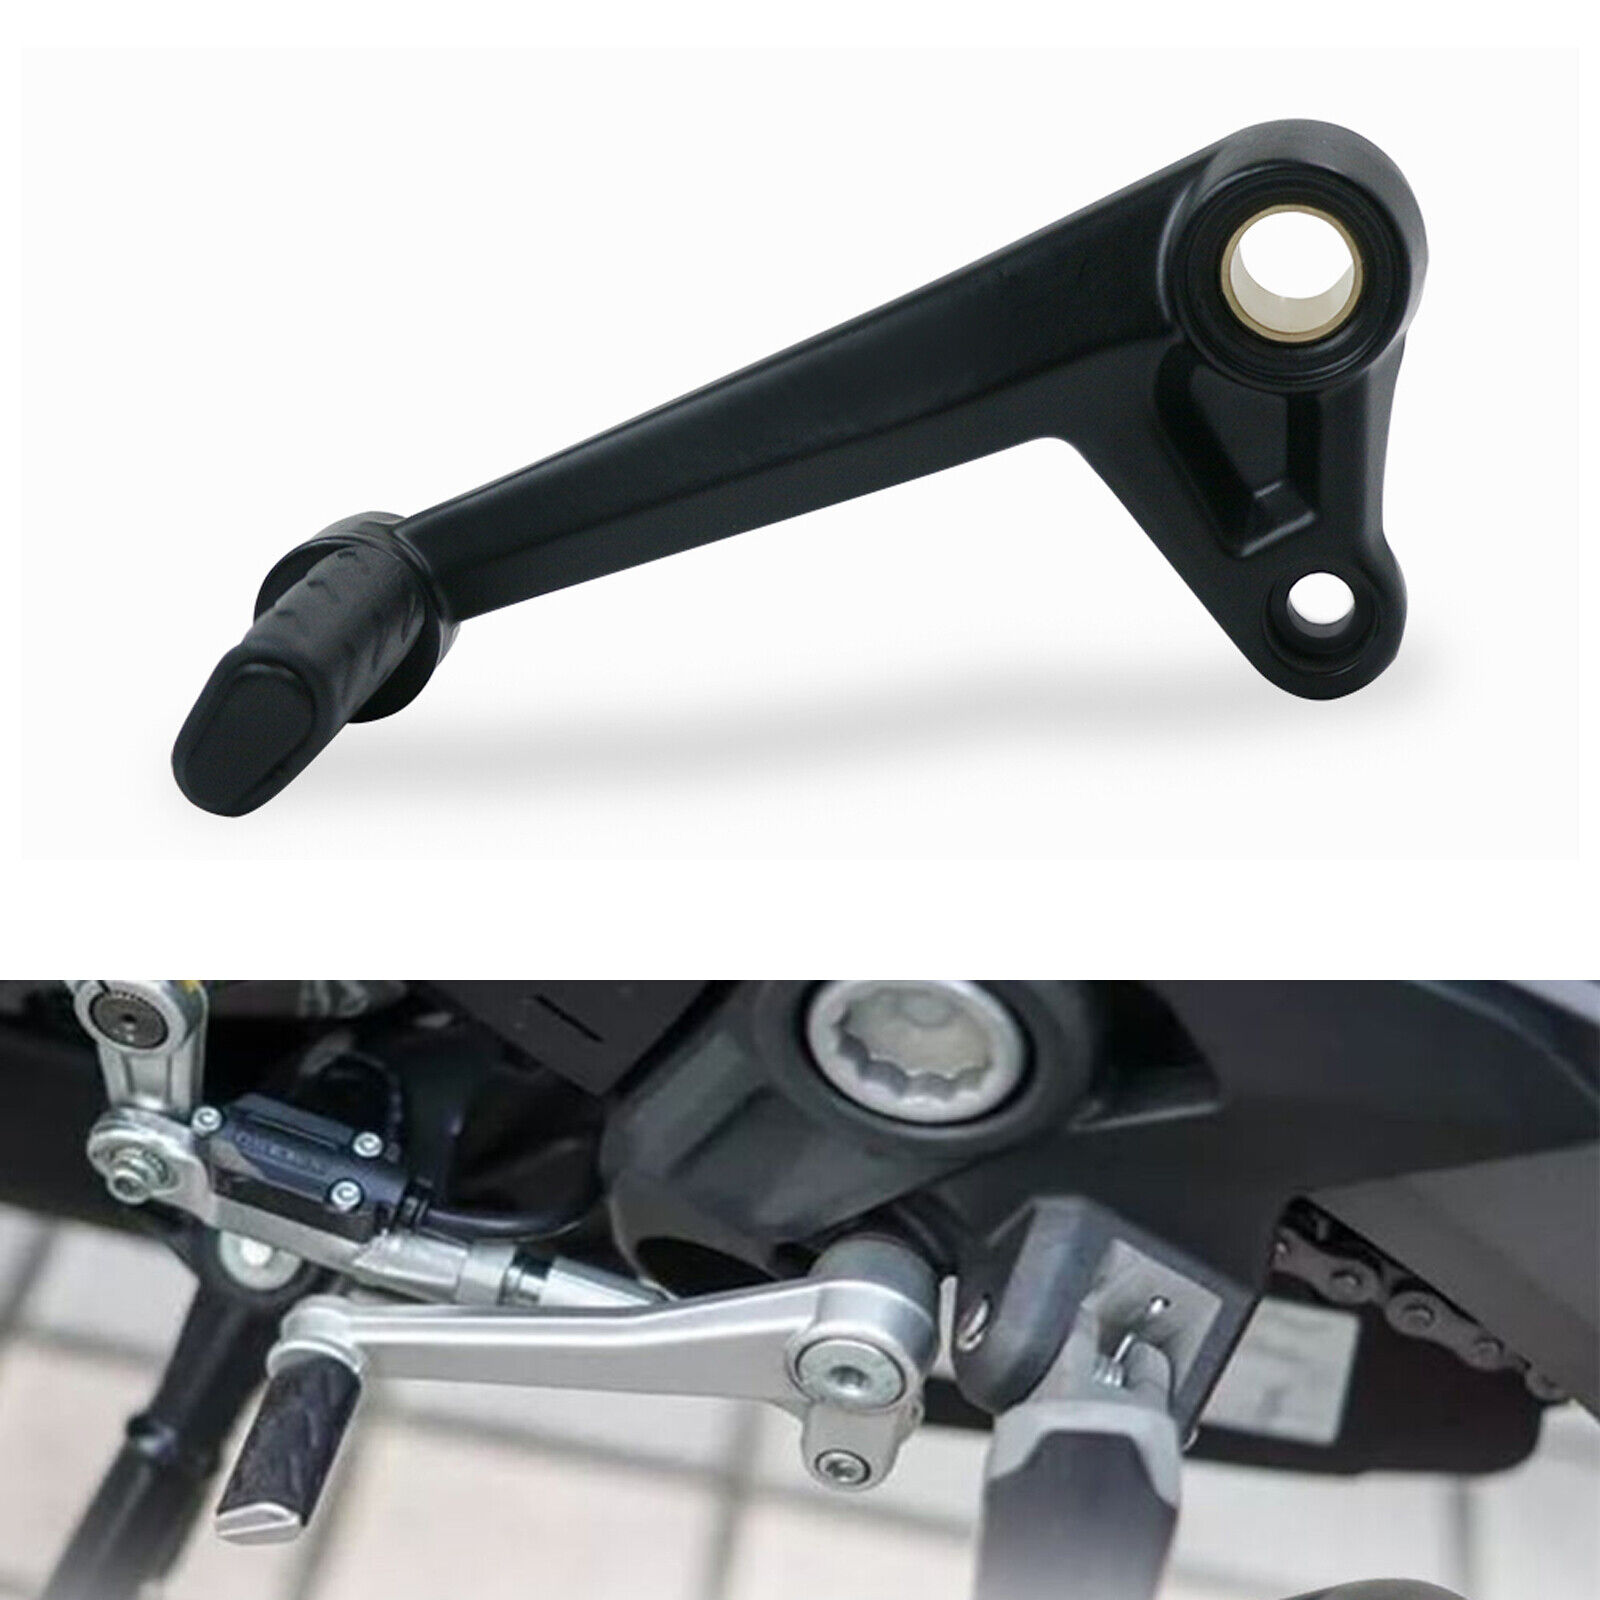 CNC Gear Shift Lever Shifter Pedal For Ducati Monster 696 796 821 1100/S 1200/S 